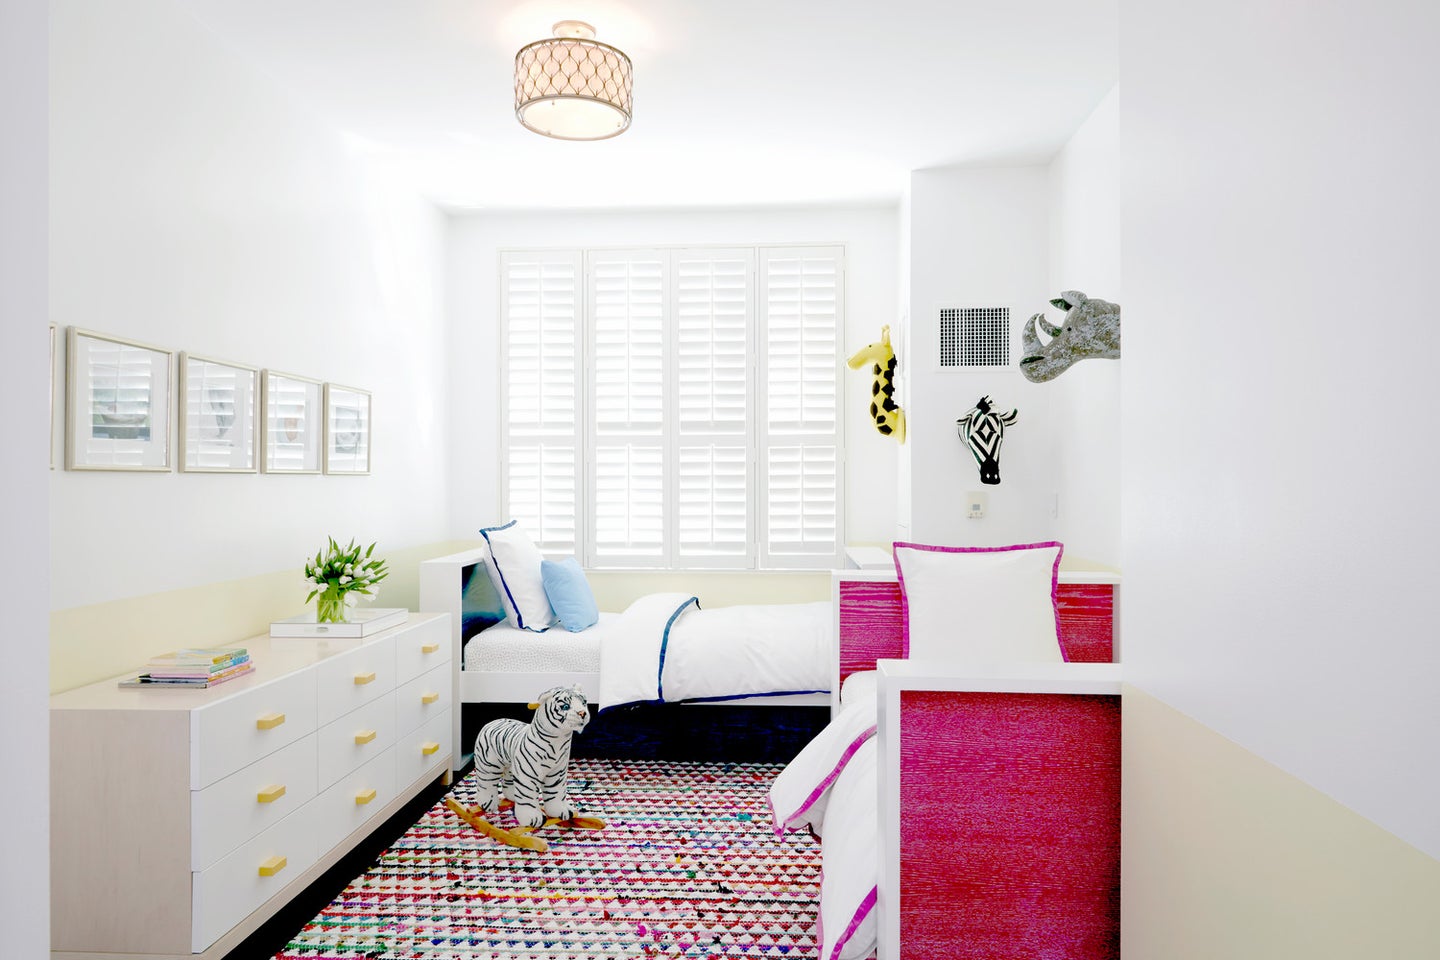 A Design Expert Shares Her Small Space Home Renovation Tips